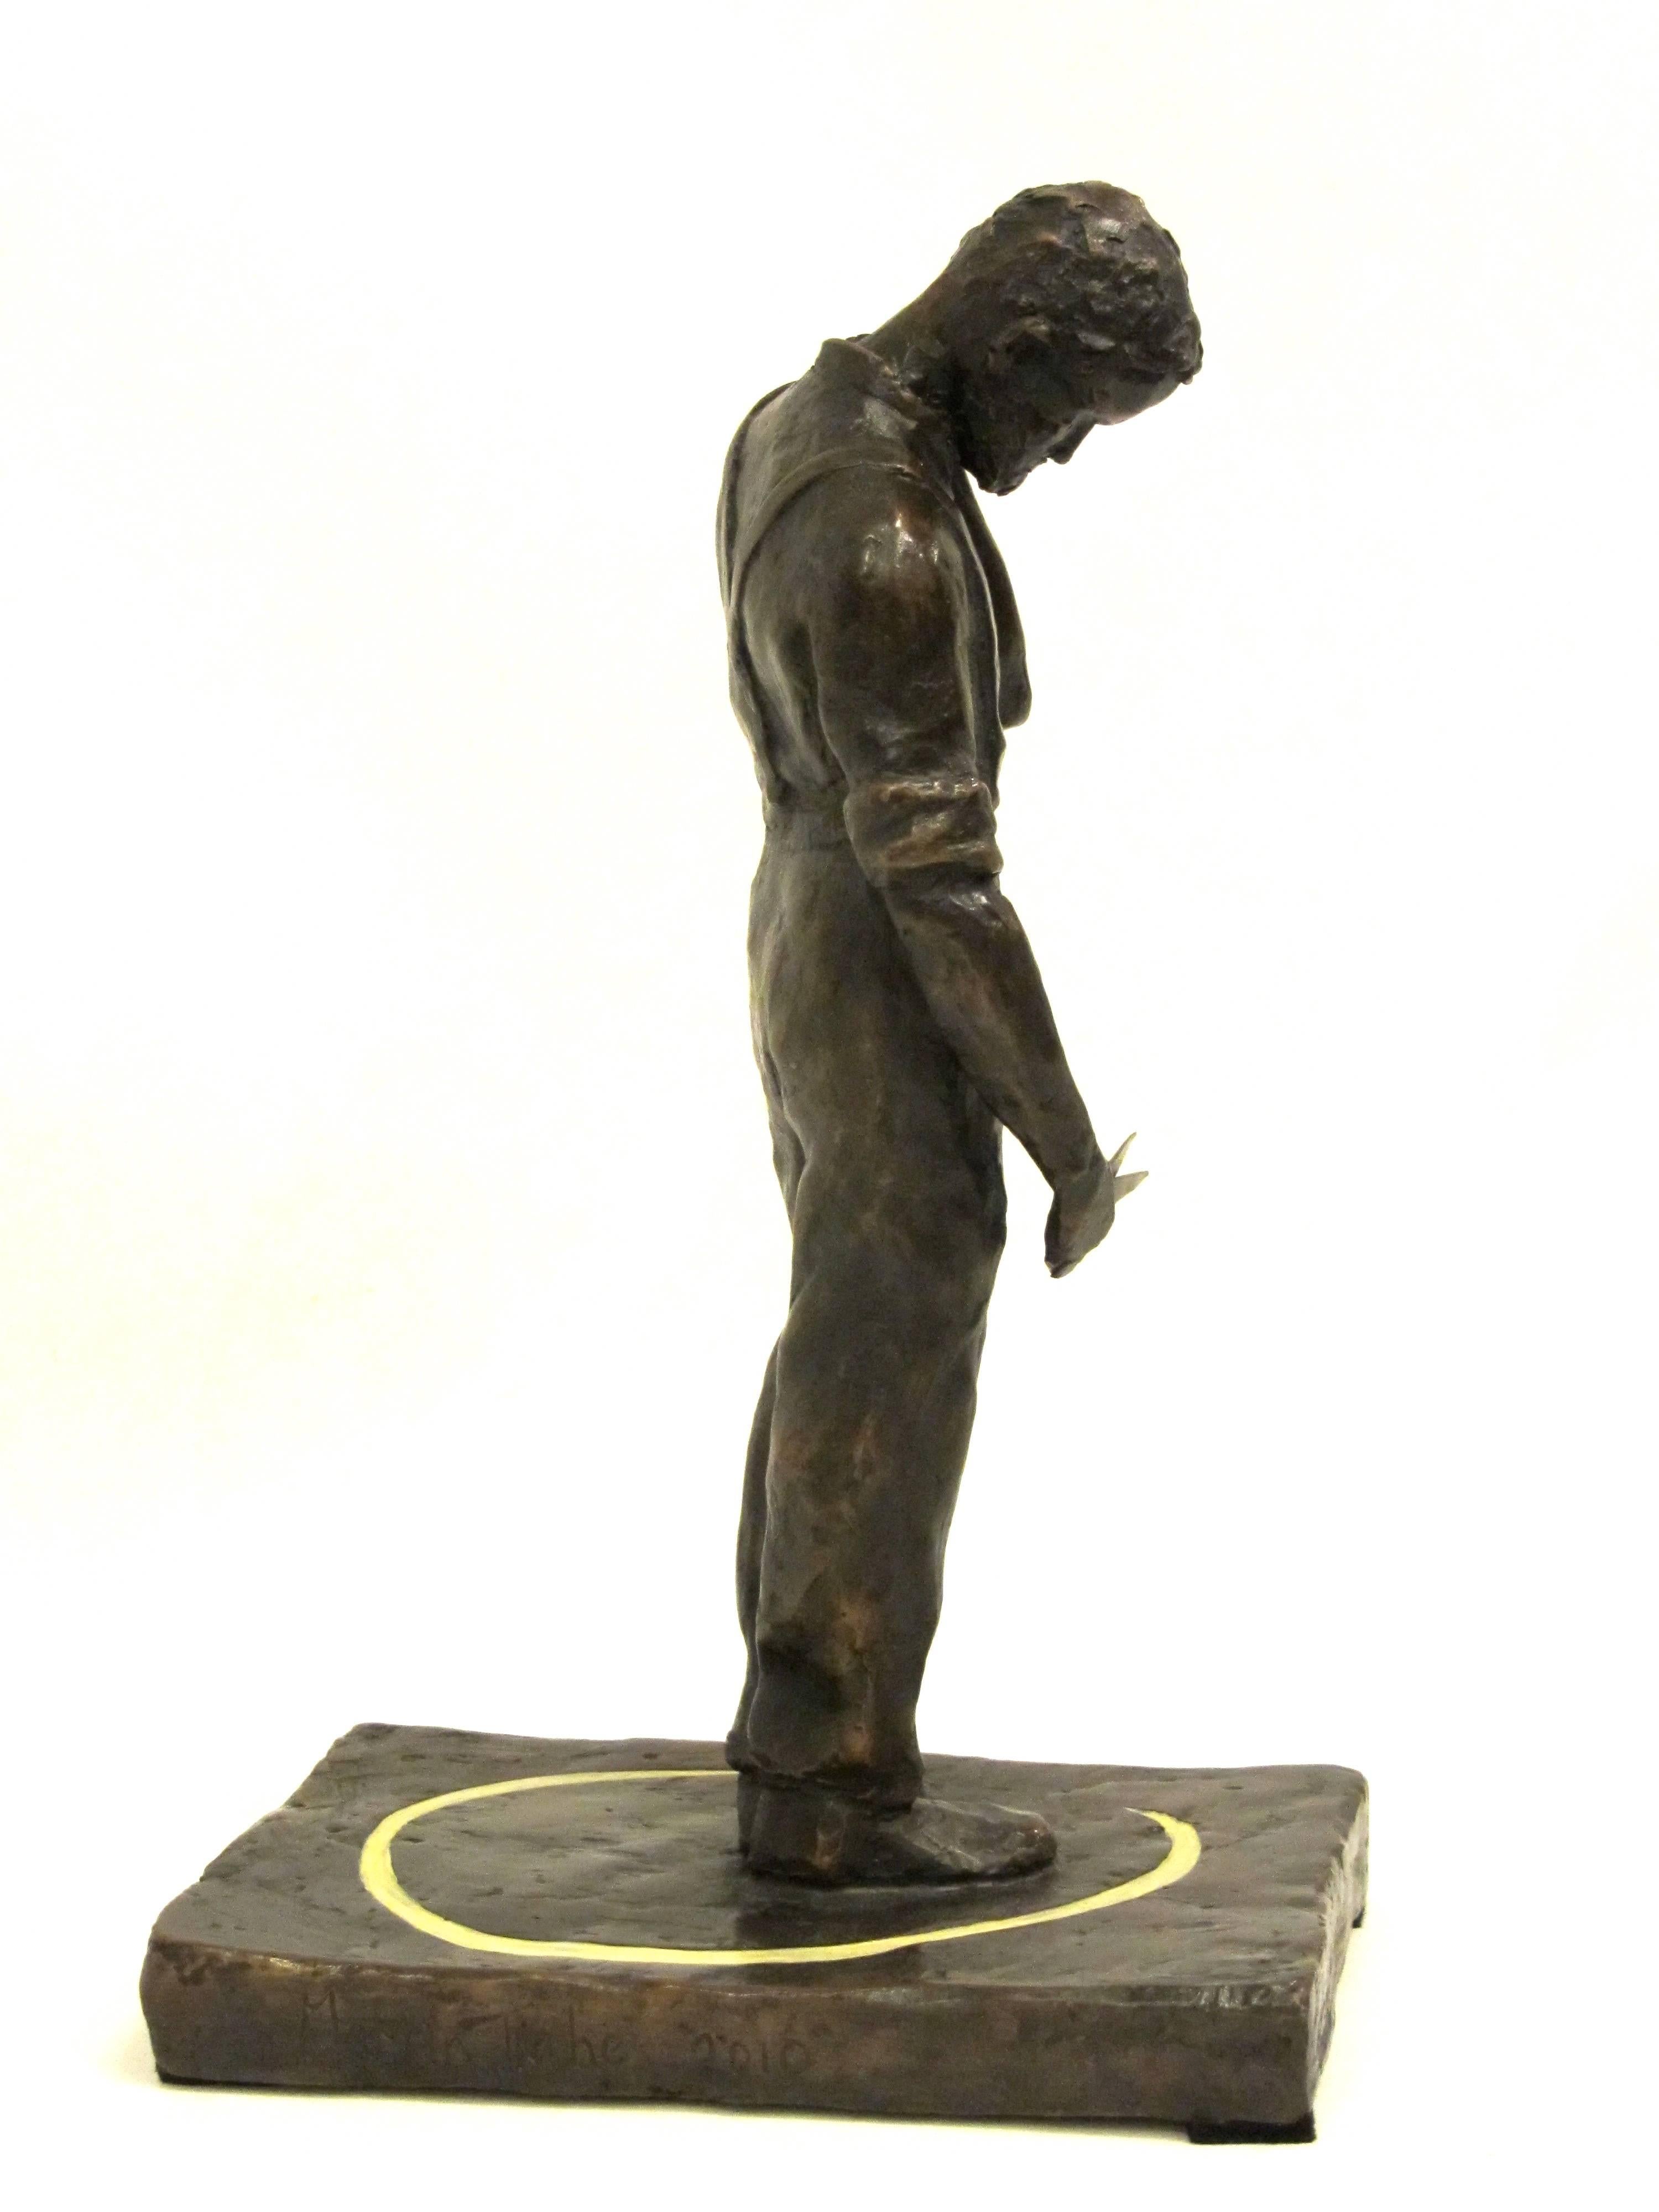 'Tom Wills'

Martin Tighe

Bronze sculpture of Tom Wills. 

Tom Wills was born in 1835 near Gundagai, NSW. Tom was an Australian all-round sportsman, umpire, coach and administrator who is credited with being a catalyst towards the invention